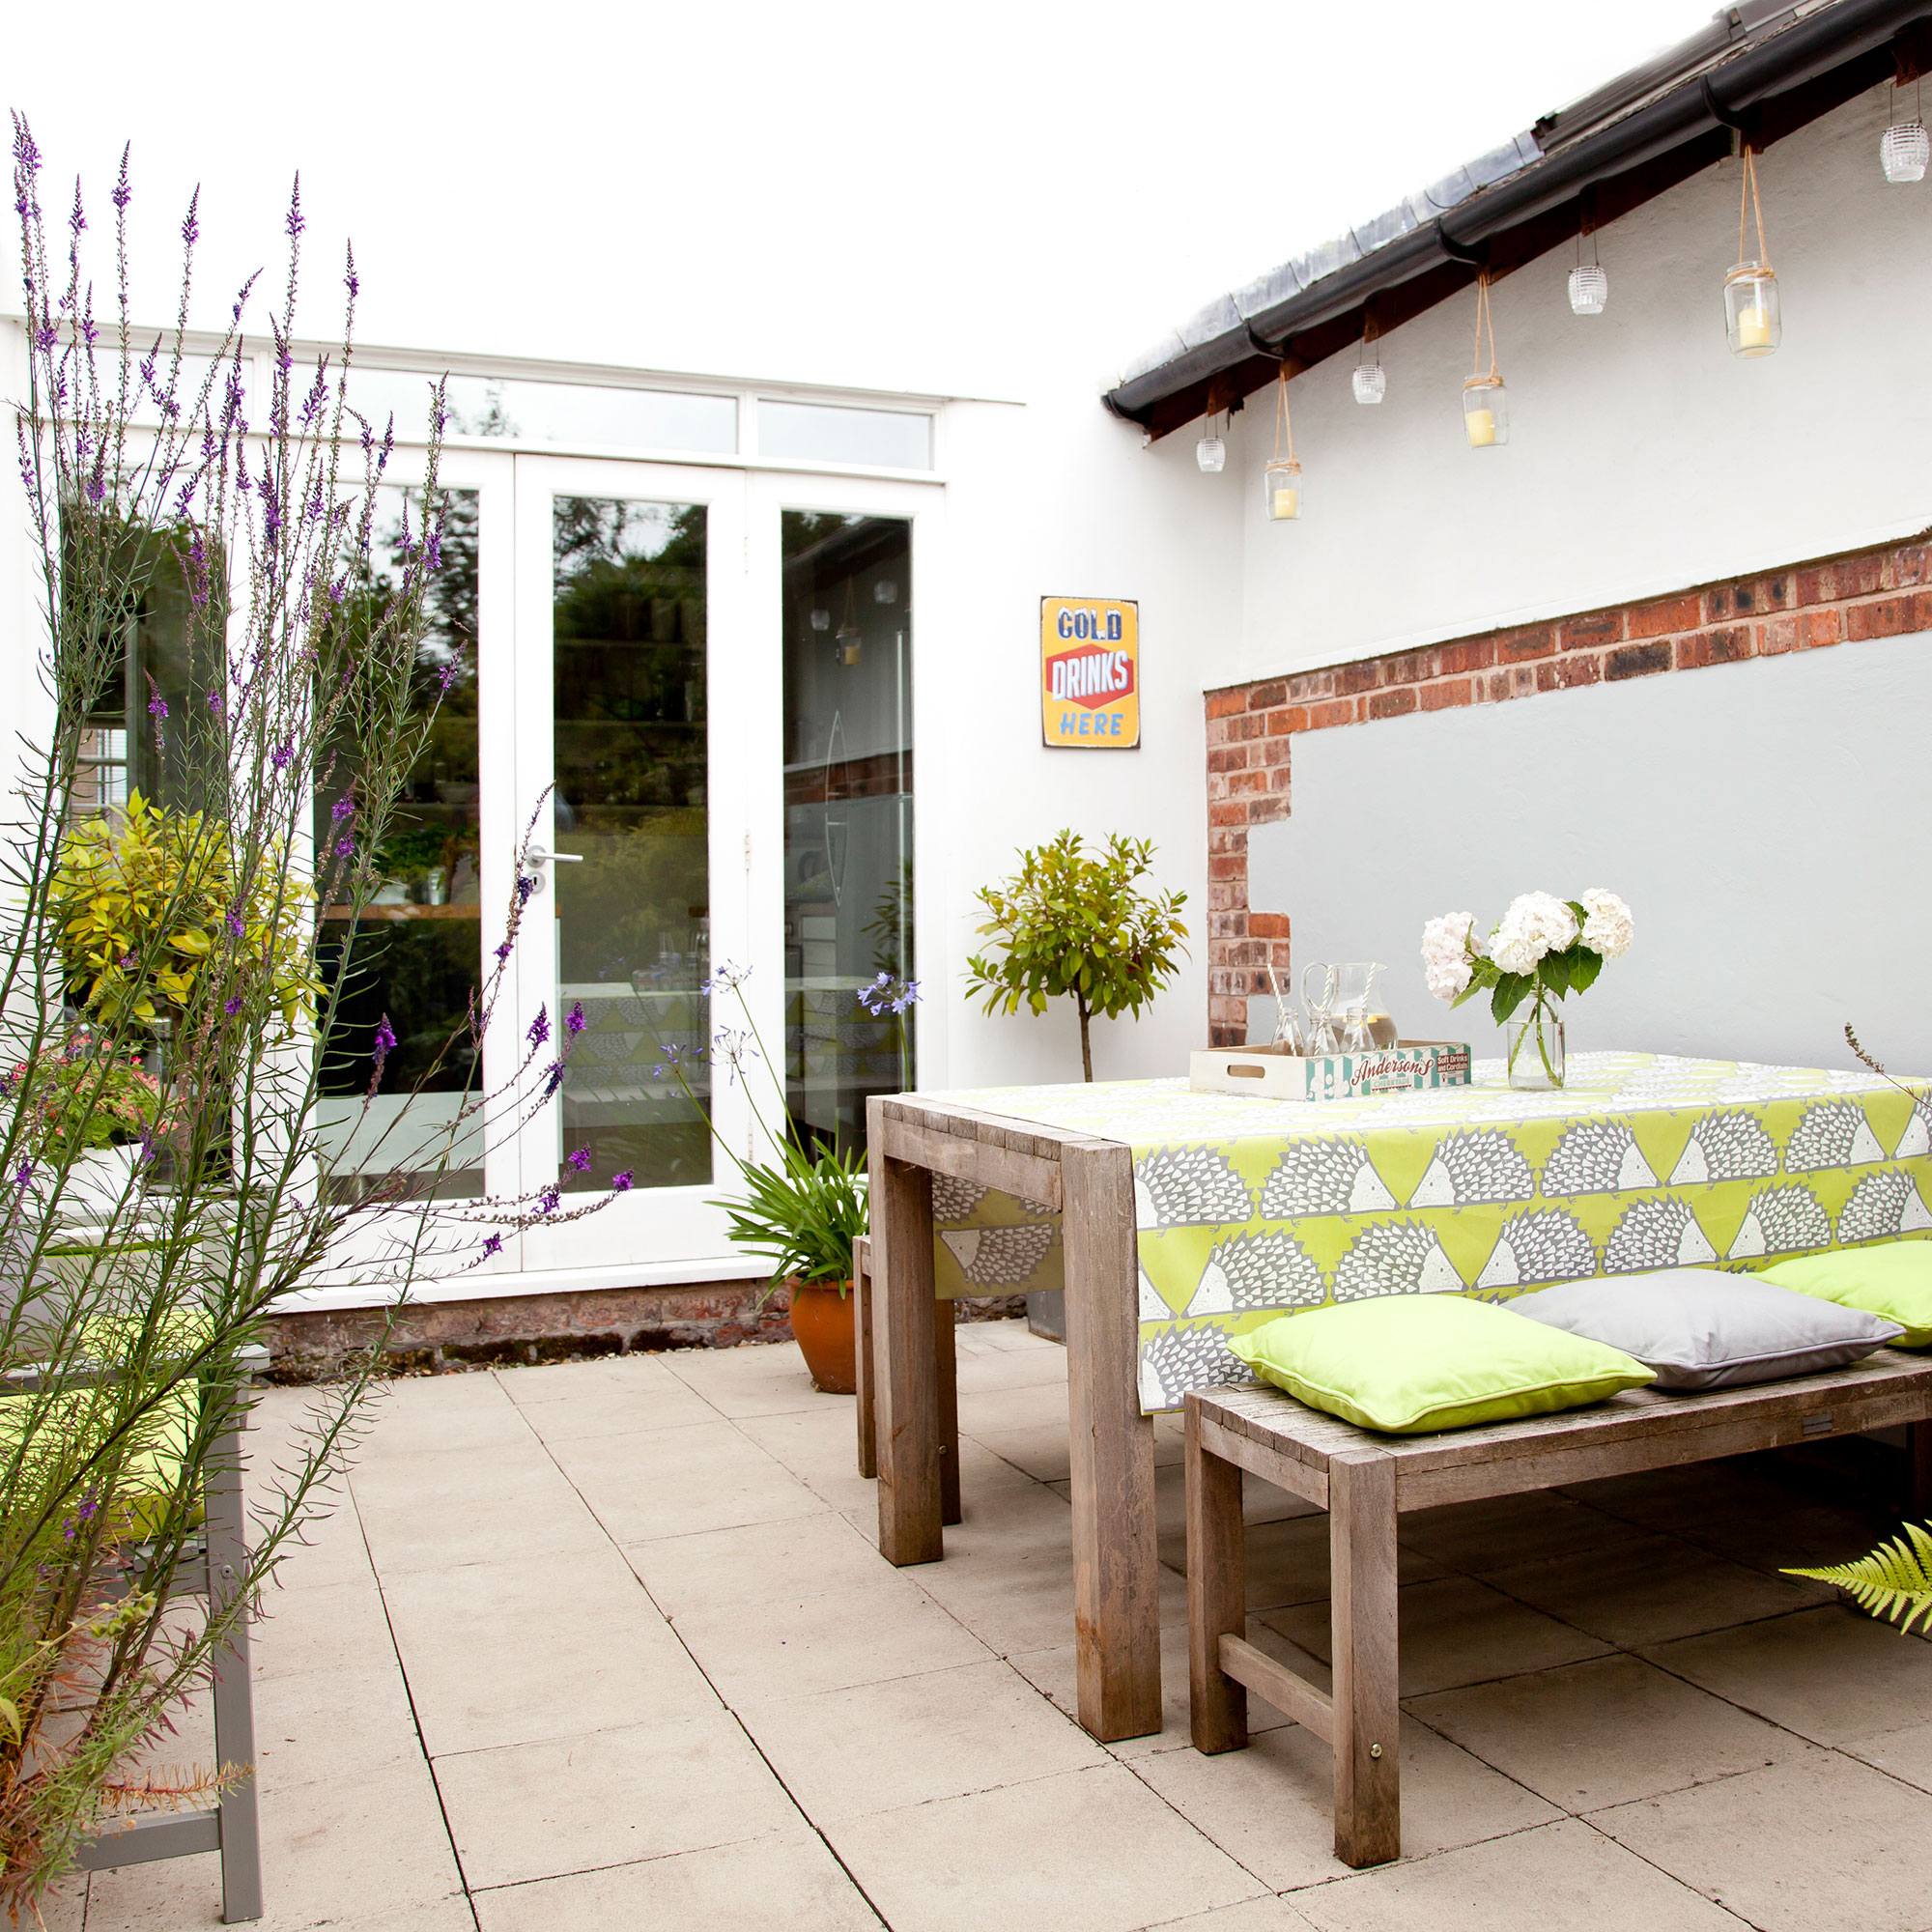 Courtyard garden, by wooden garden bench and table with lime green patterned cloth and cushions, stone patio.